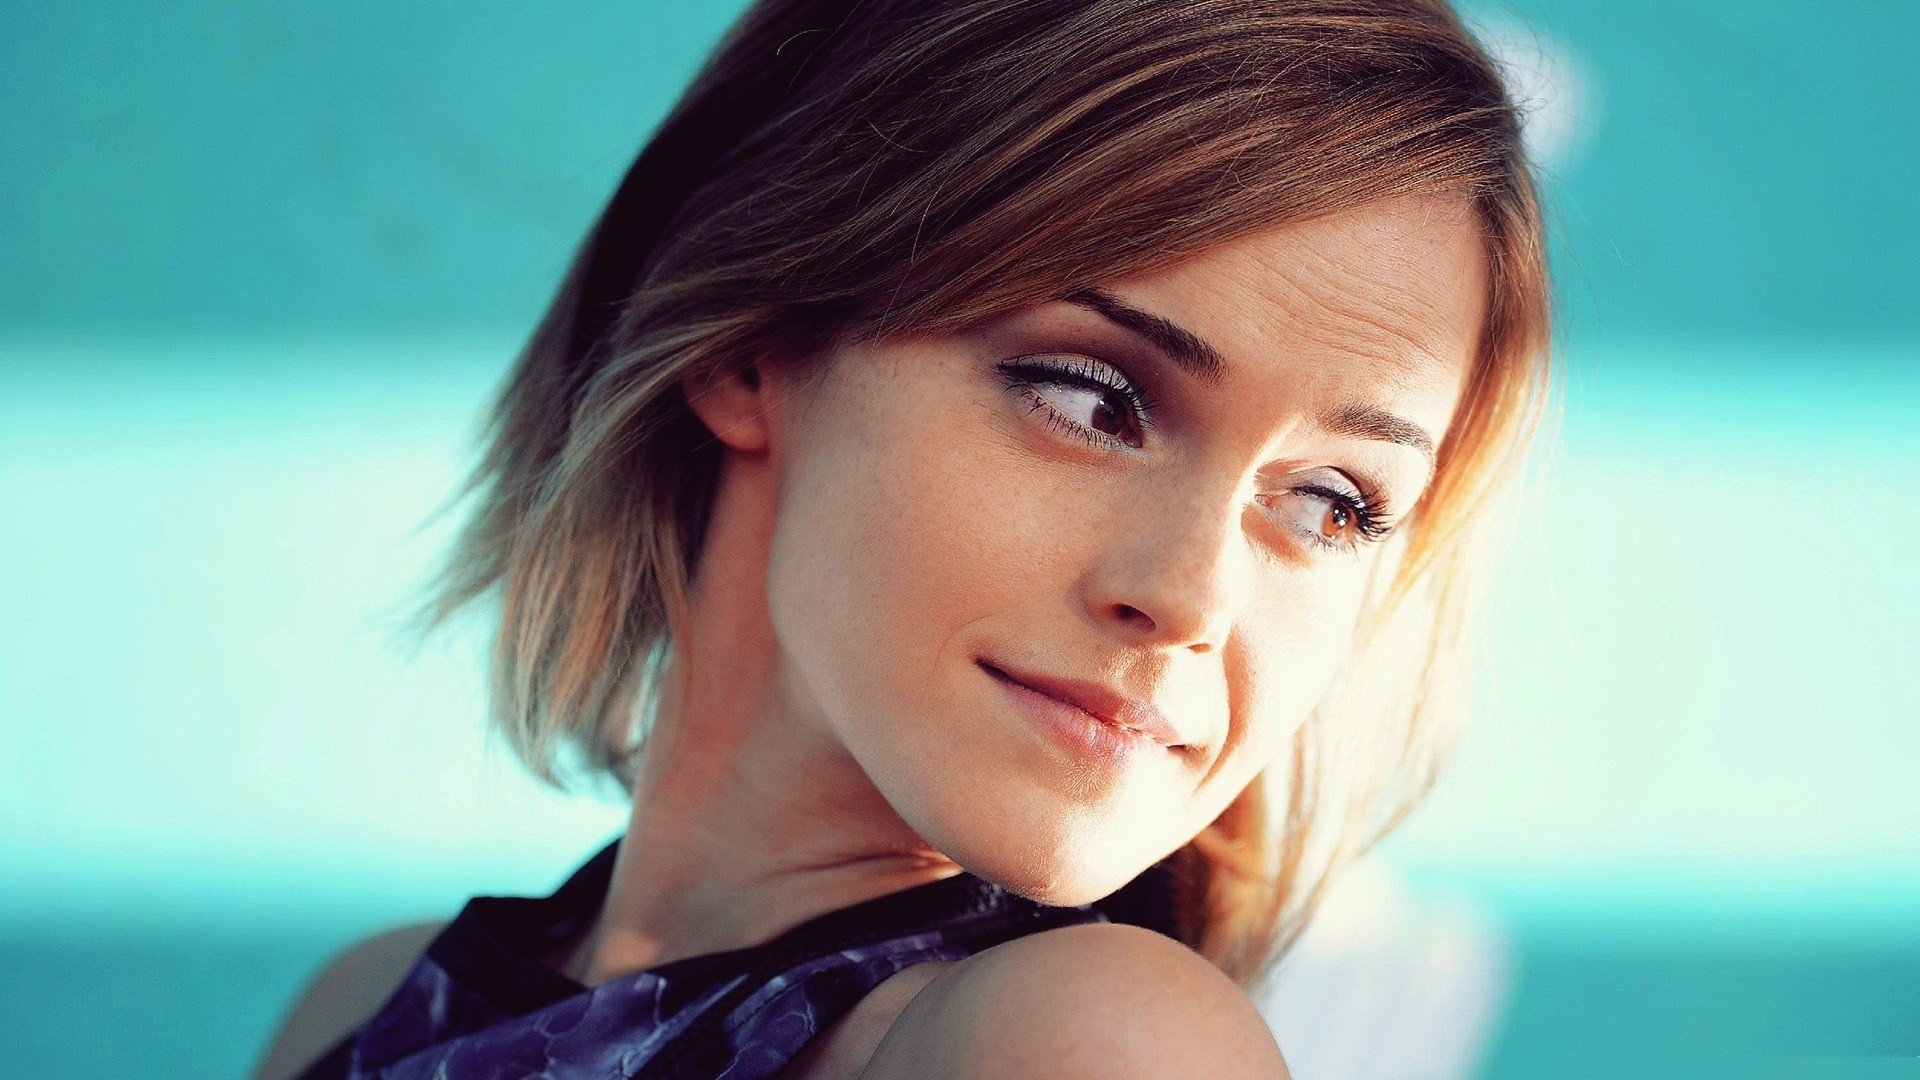 Wallpapers Emma Watson young turned around on the desktop